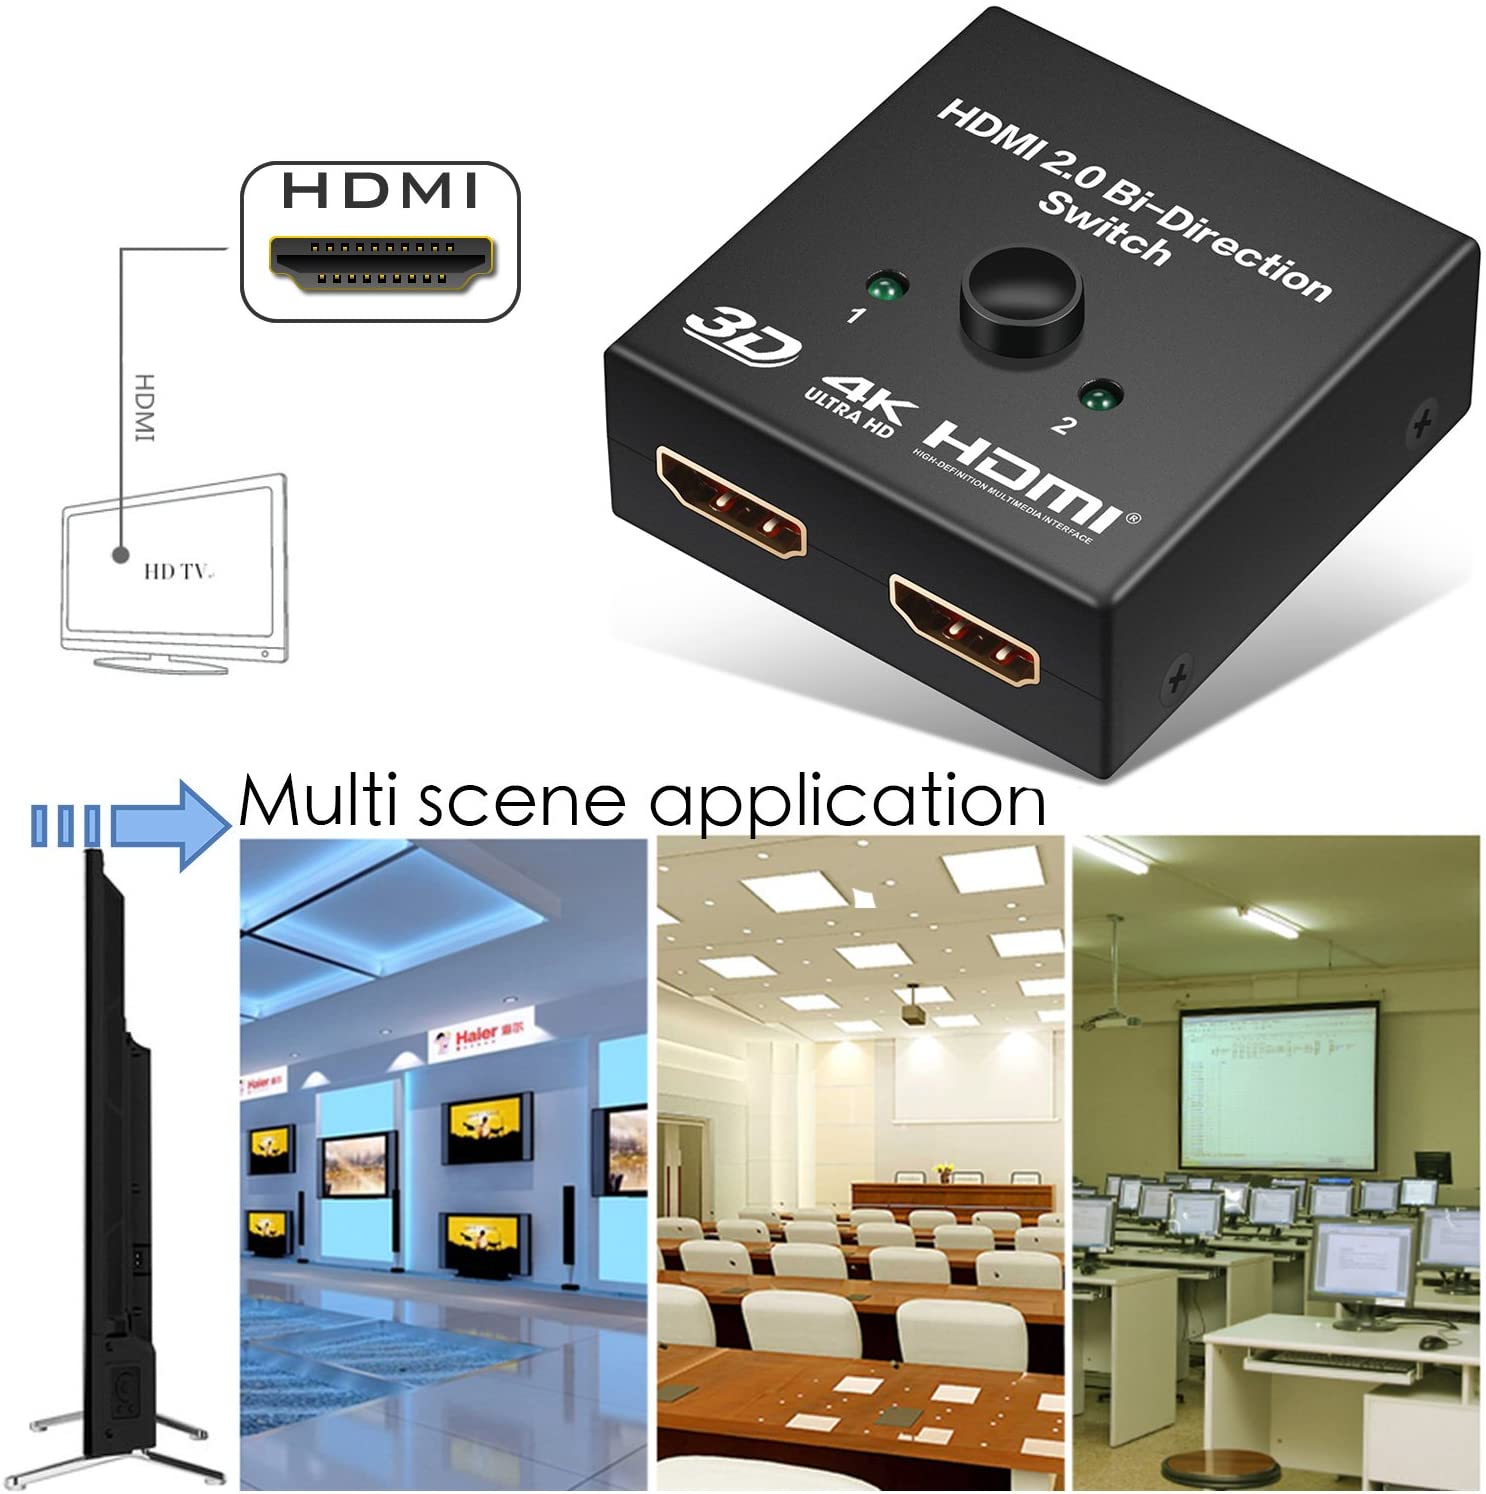 HDMI Splitter, Aluminum HDMI Switch 4K HDMI 2.0 Switcher 1 in 2 Out, HDMI Switch Splitter 2 x 1/1 x 2,Supports 3D 4K@60HZ Full HD1080P for Xbox PS4 Fire Stick Roku Blu-Ray Player Apple - image 4 of 8